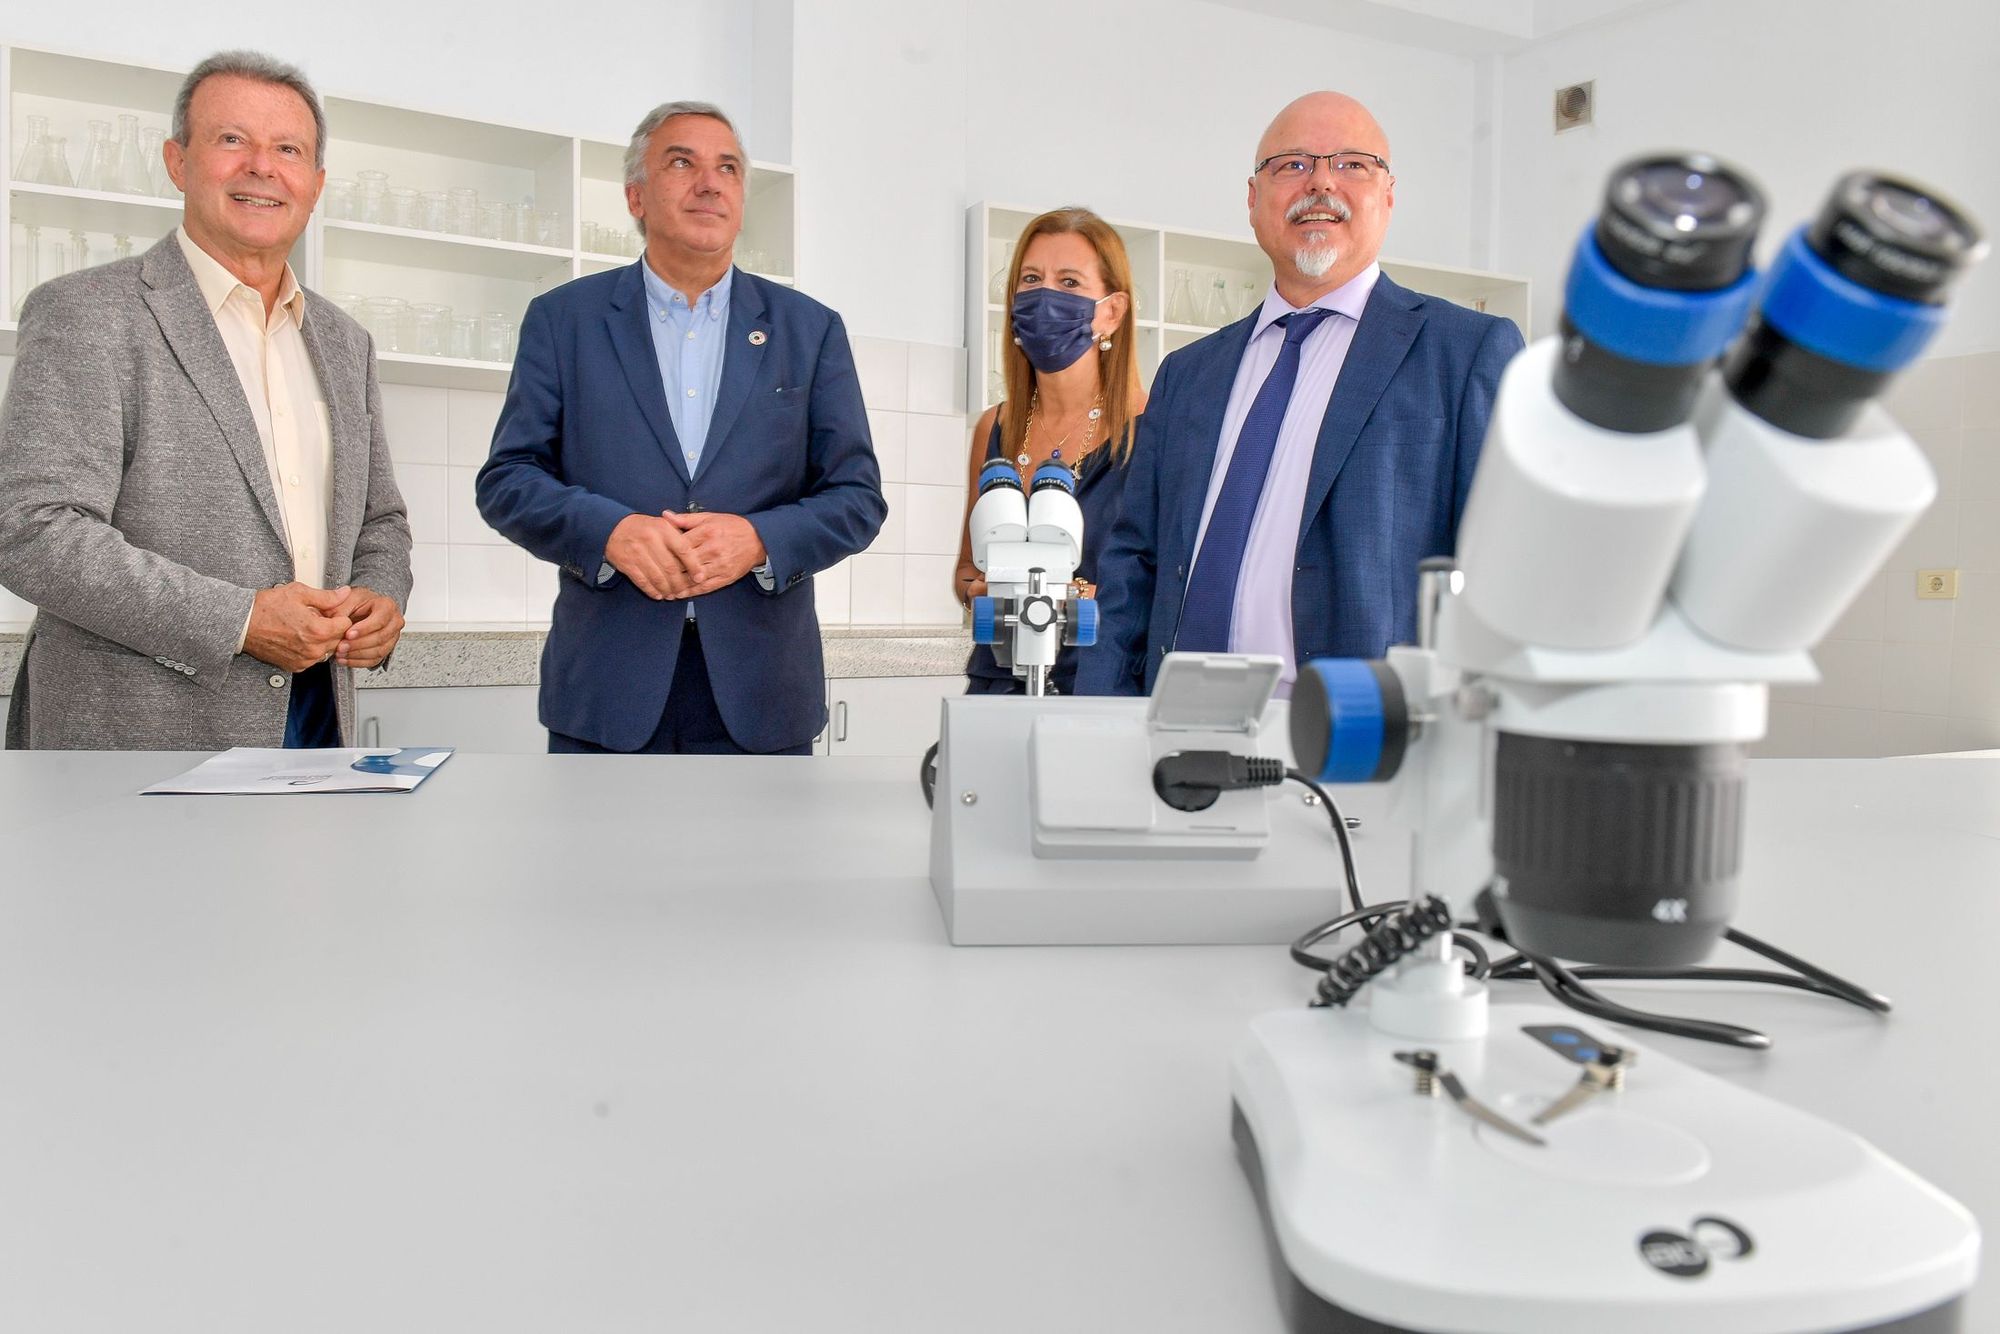 Opening of the educational experimental science lab